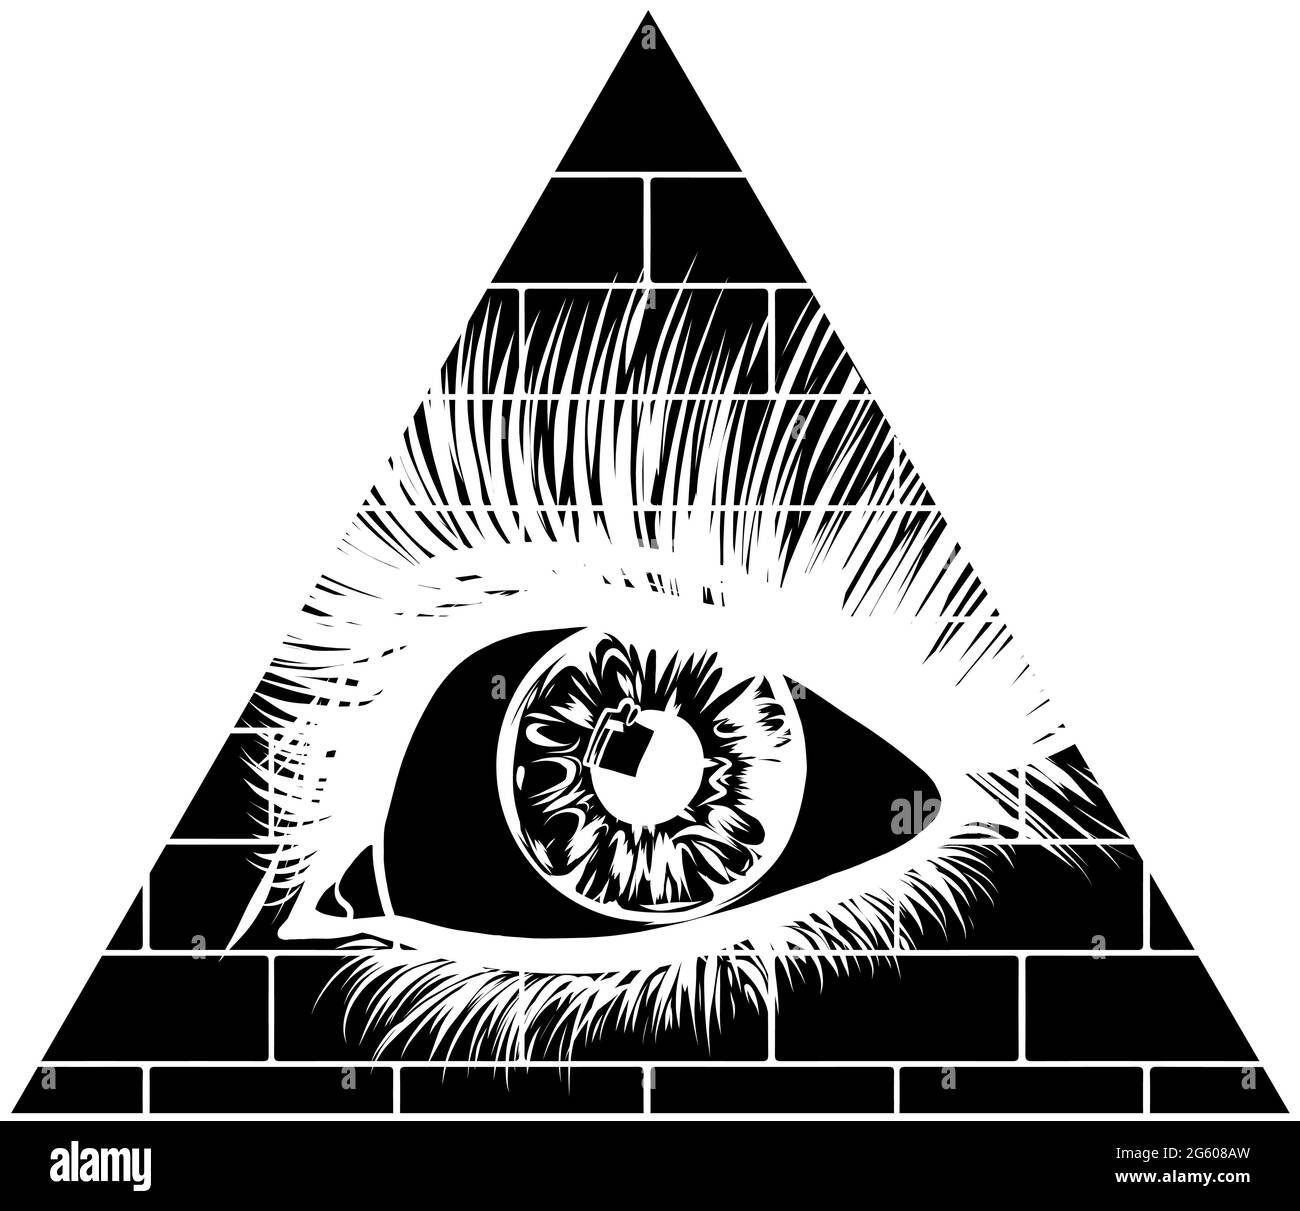 Eye of providence. All seeing eye in the triangle on top of the pyramid masonic symbol. Stock Vector